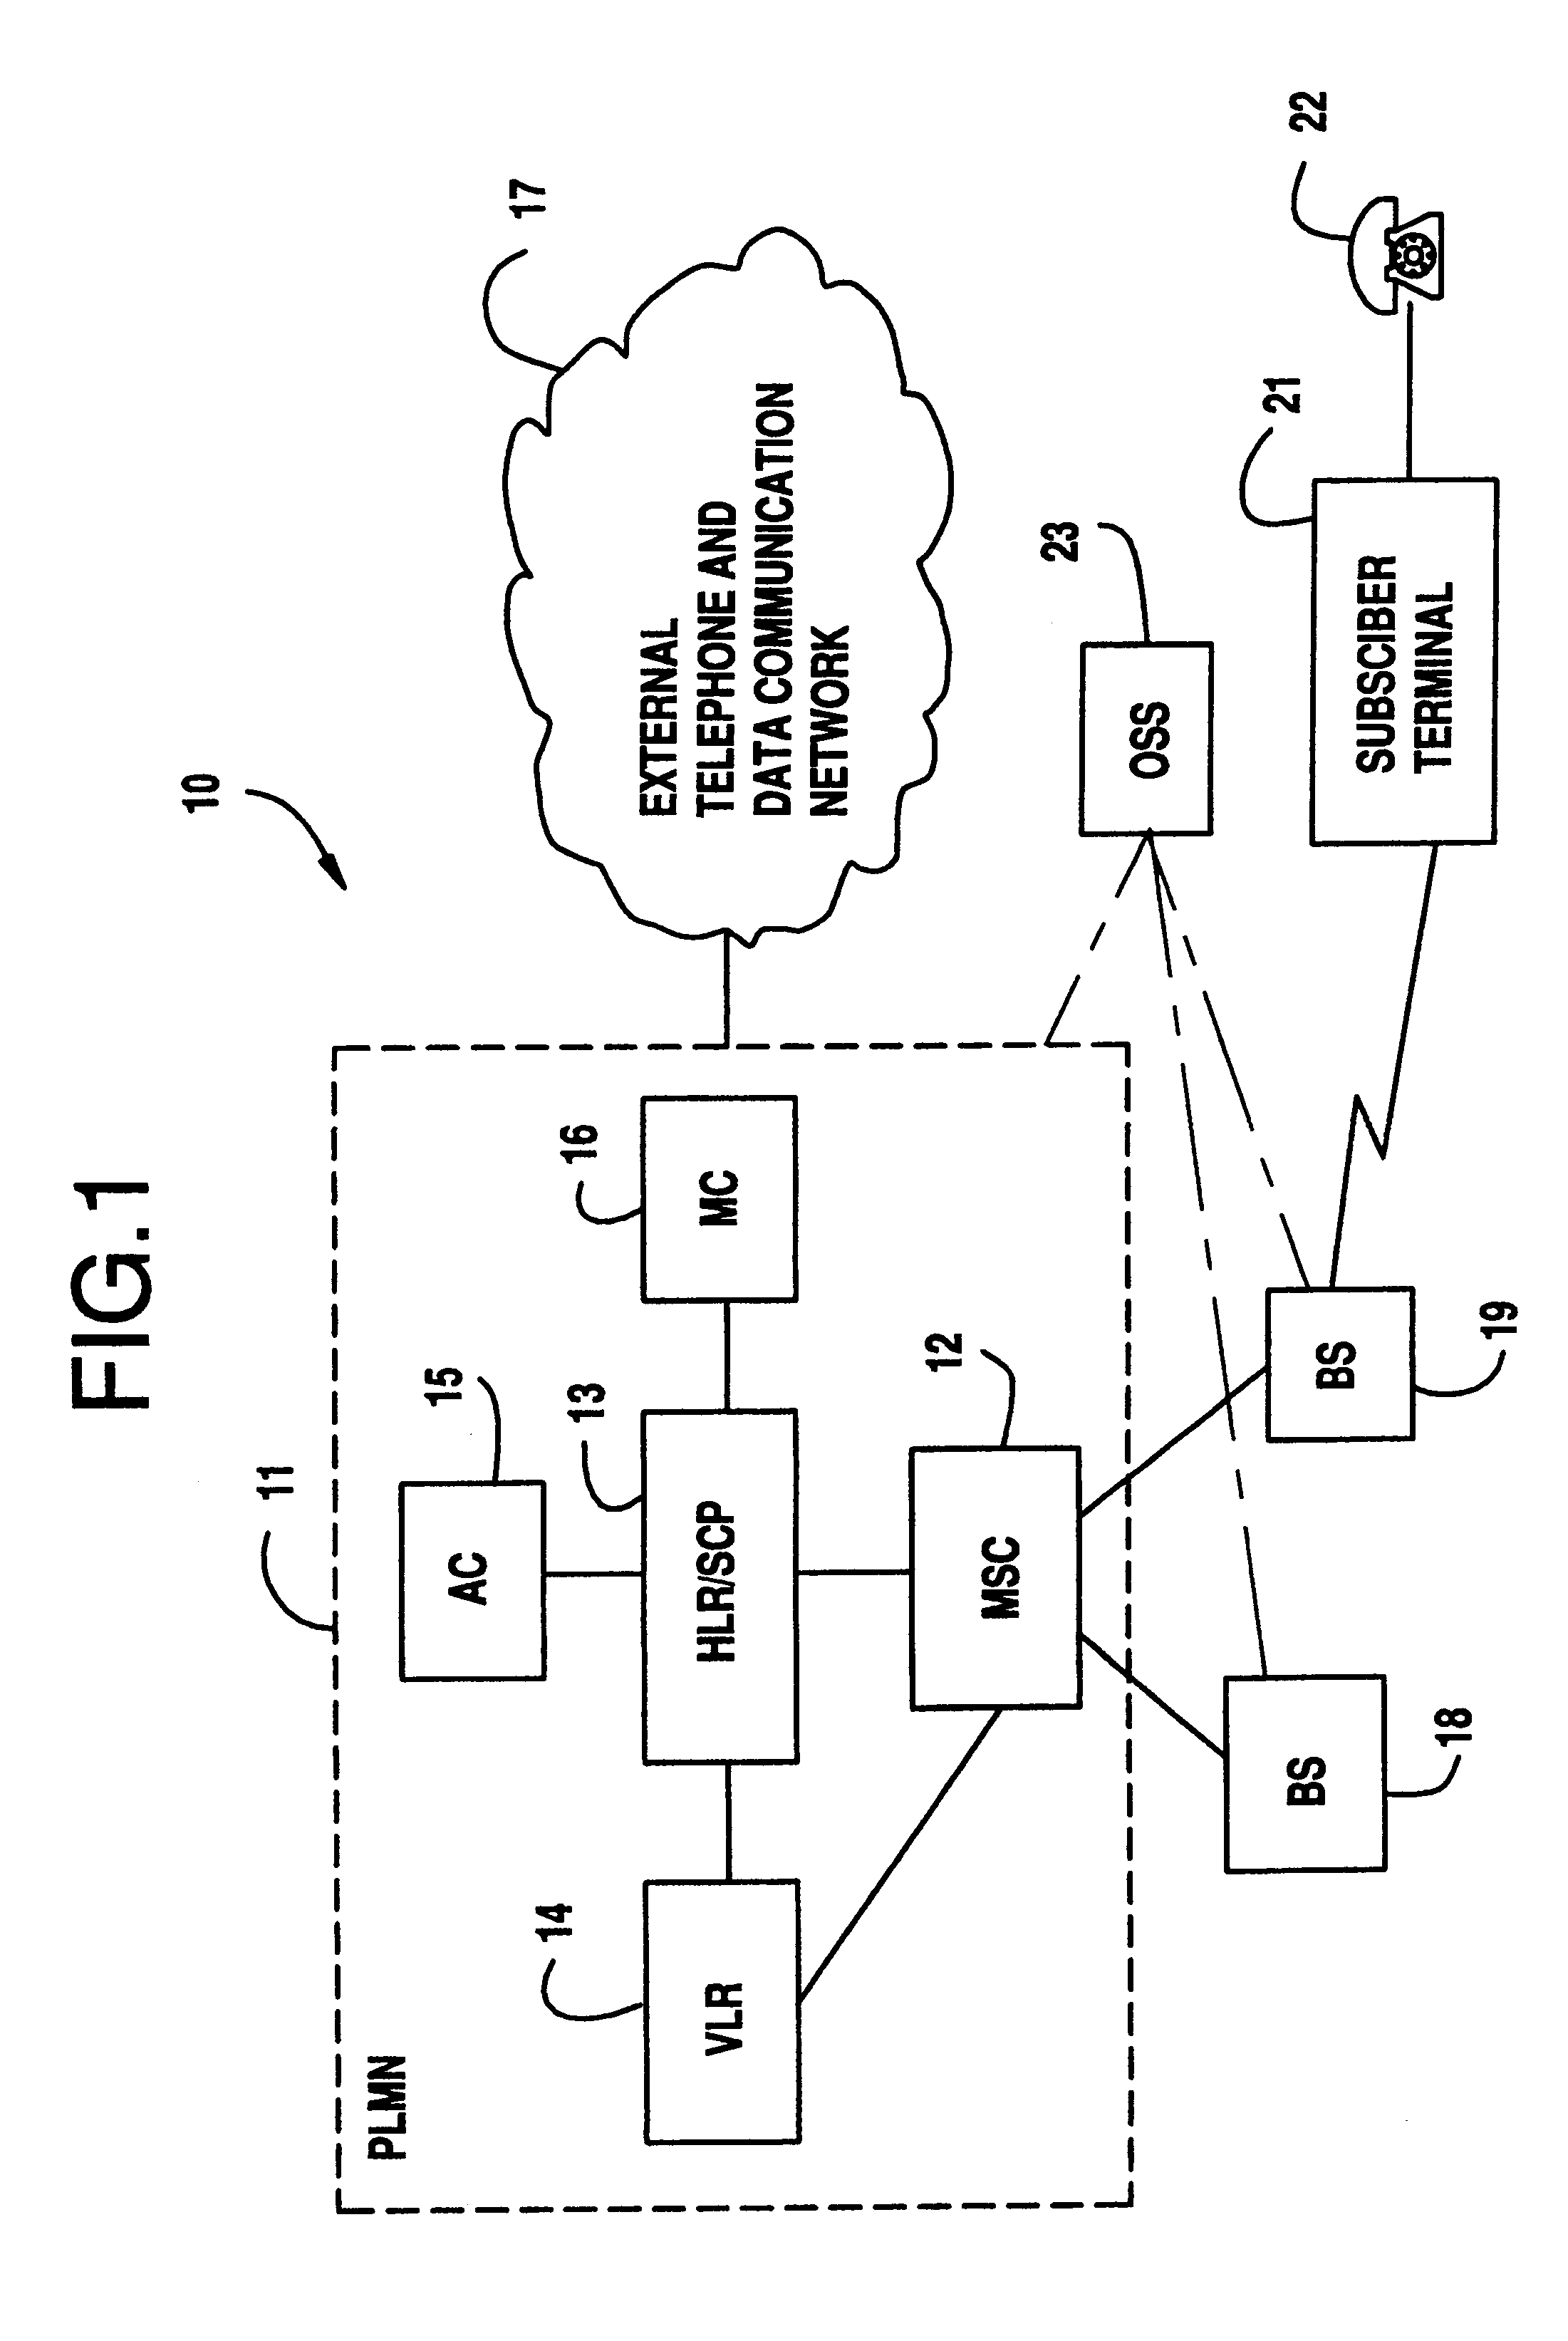 System and method of providing group wireless extension phone service in a radio telecommunications network